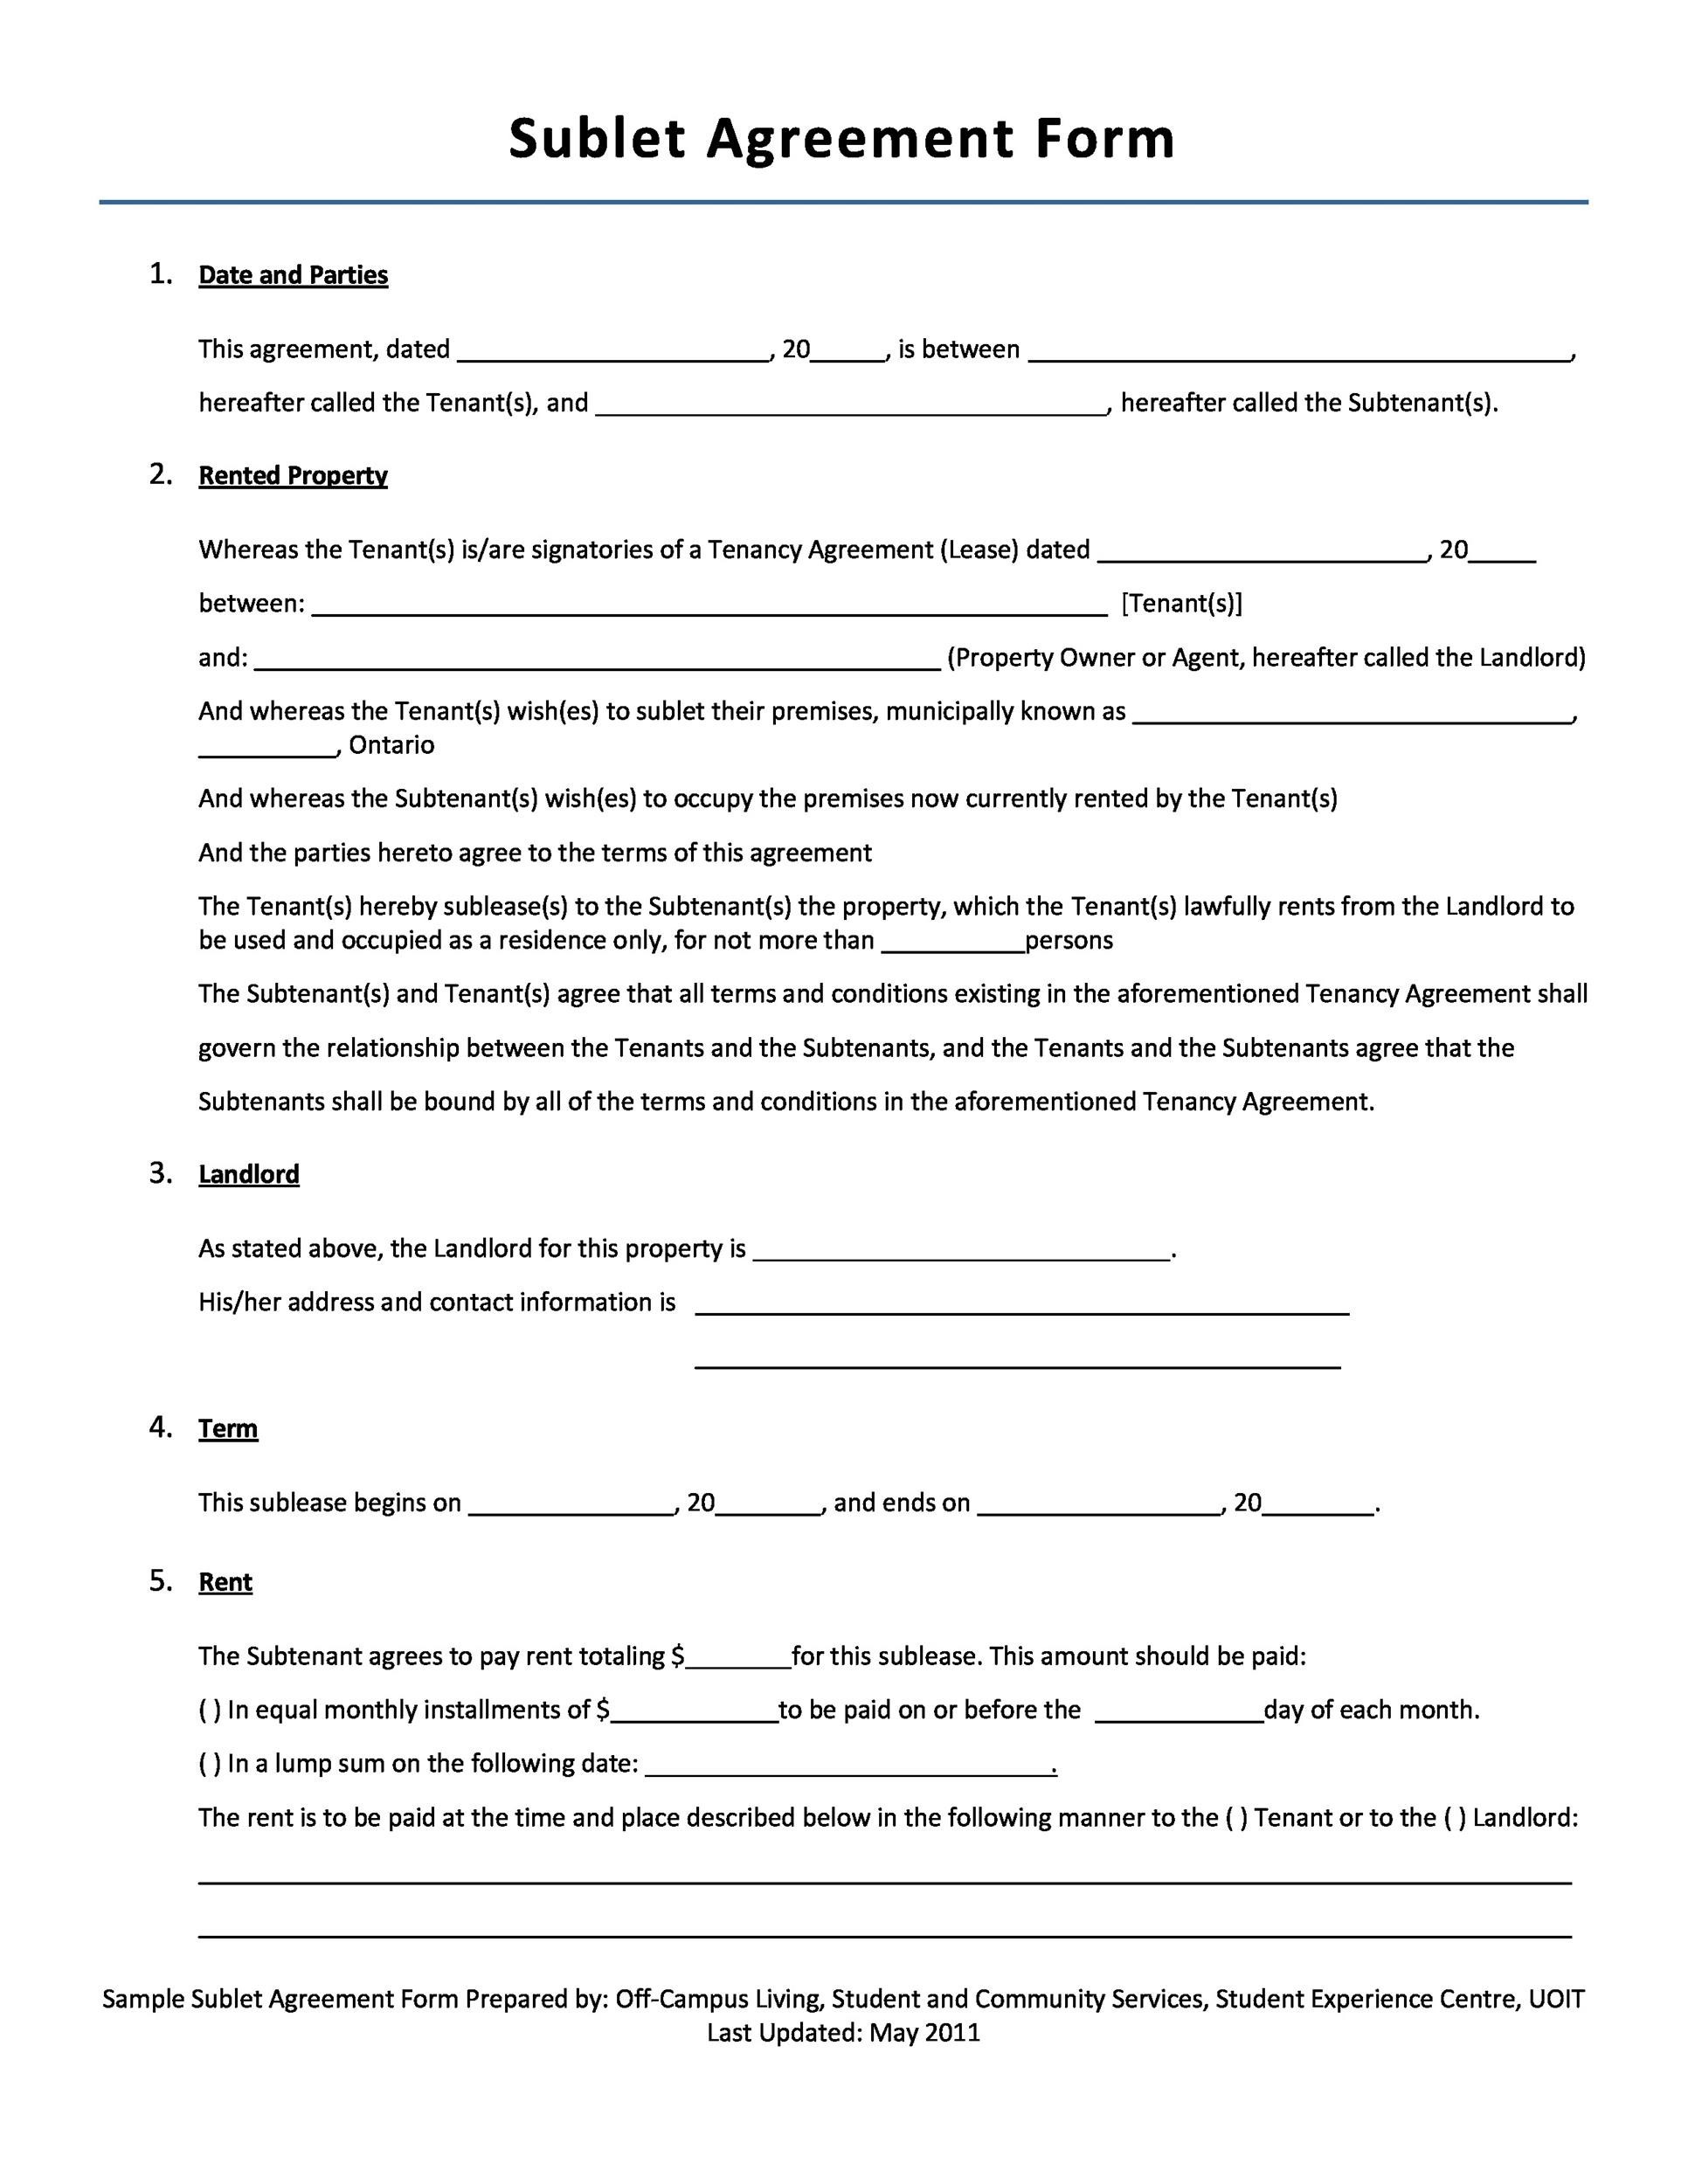 40 Professional Sublease Agreement Templates Forms TemplateLab